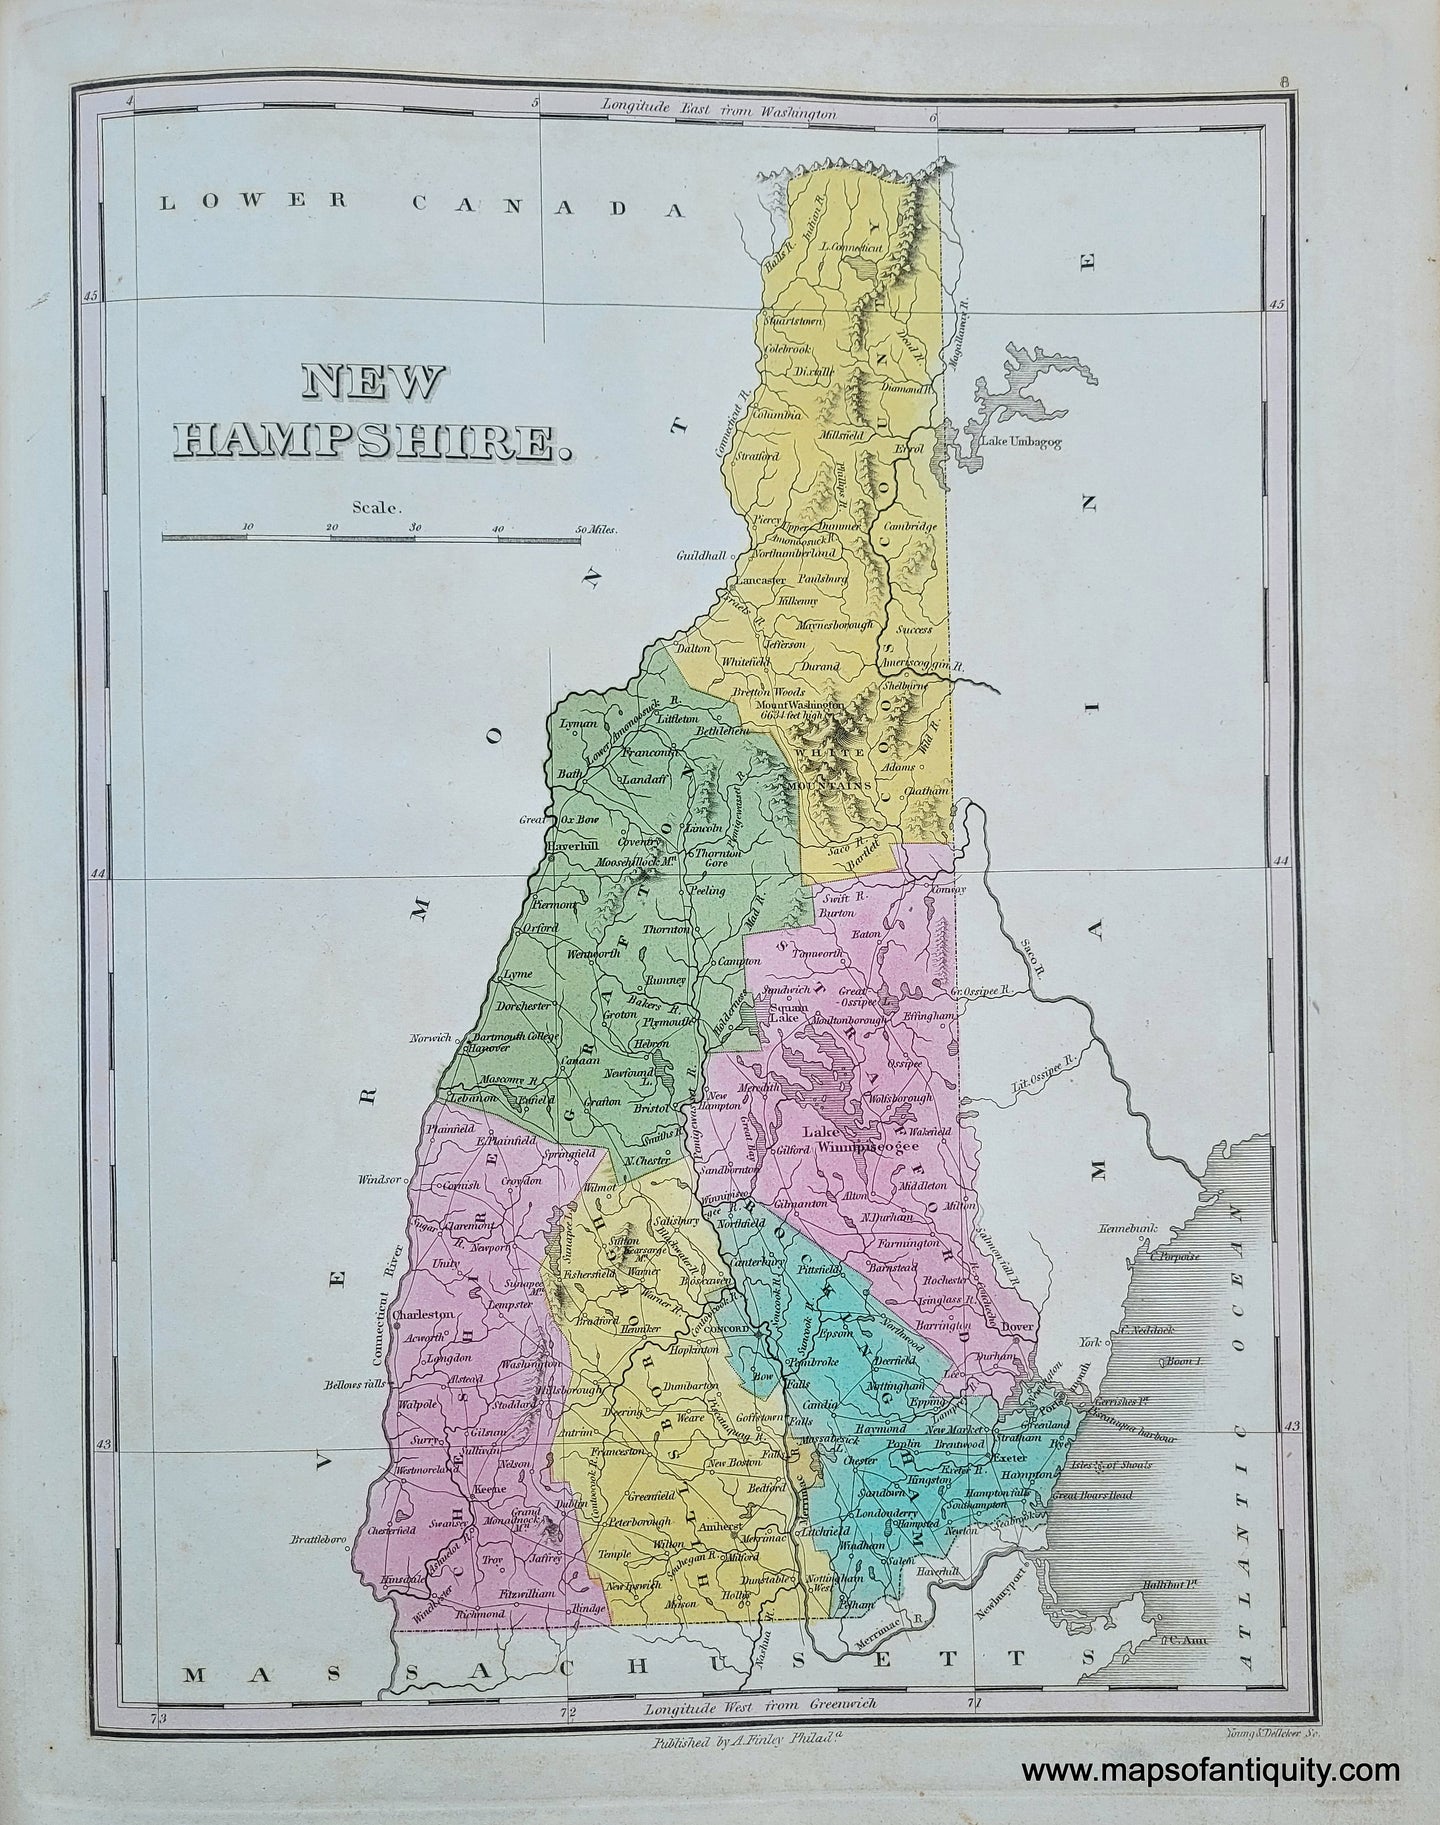 Antique-Map-New-Hampshire-1824-Finley-1820s-1800s-19th-century-maps-of-antiquity